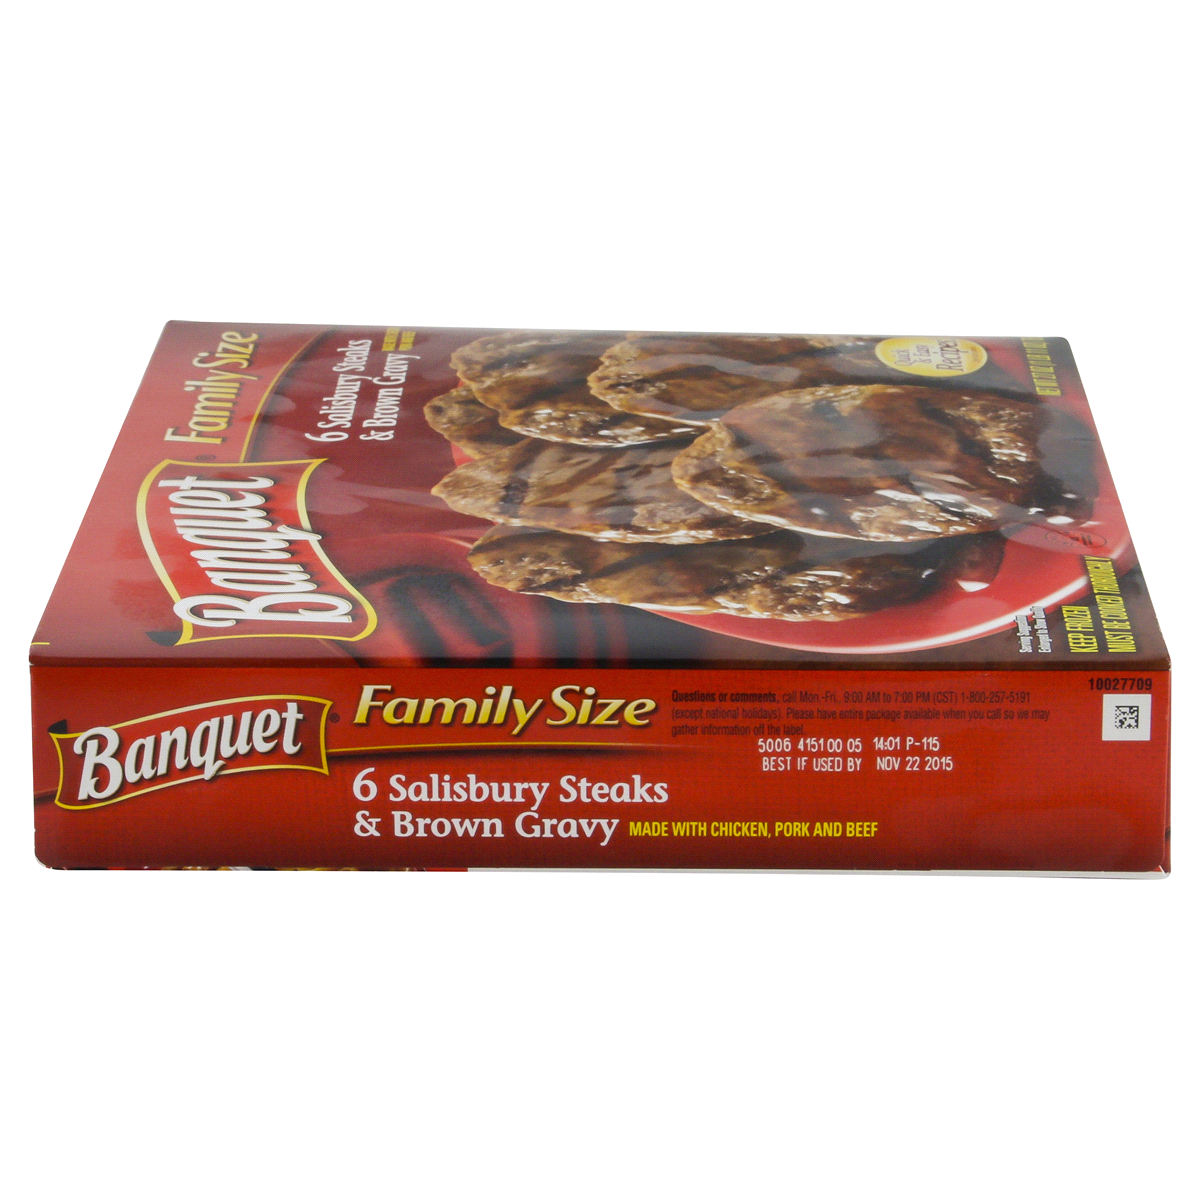 slide 5 of 6, Banquet Family Size Salisbury Steaks and Brown Gravy, Frozen Meal, 27 oz., 27 oz